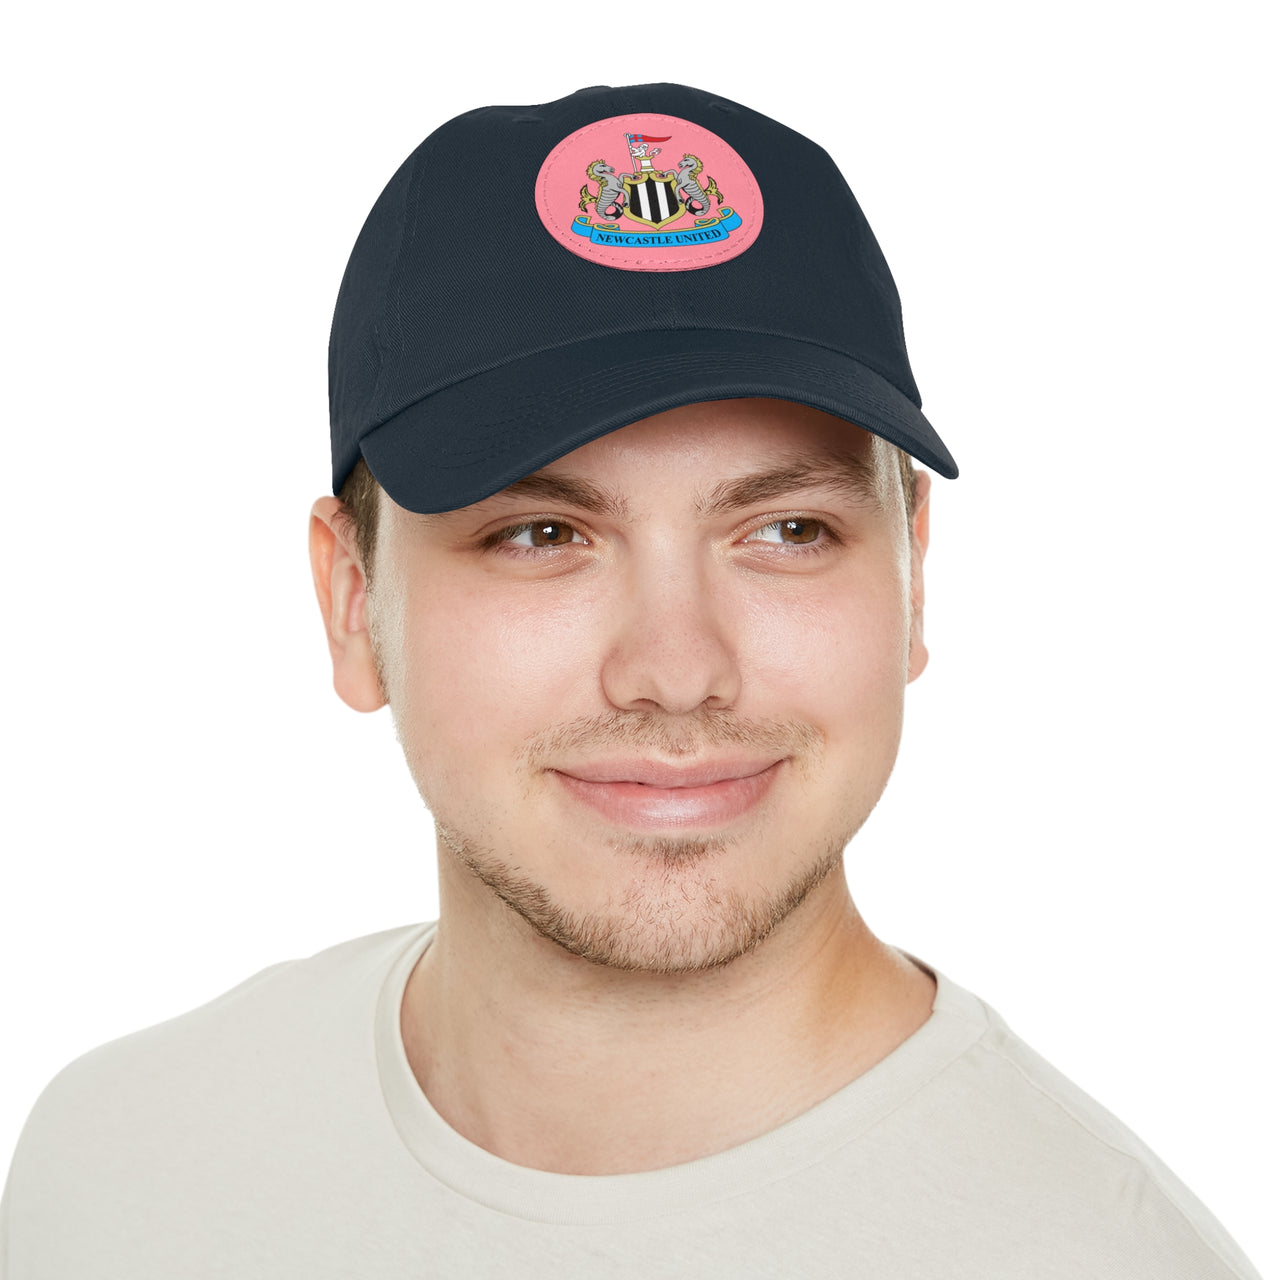 Newcastle Dad Hat with Leather Patch (Round)